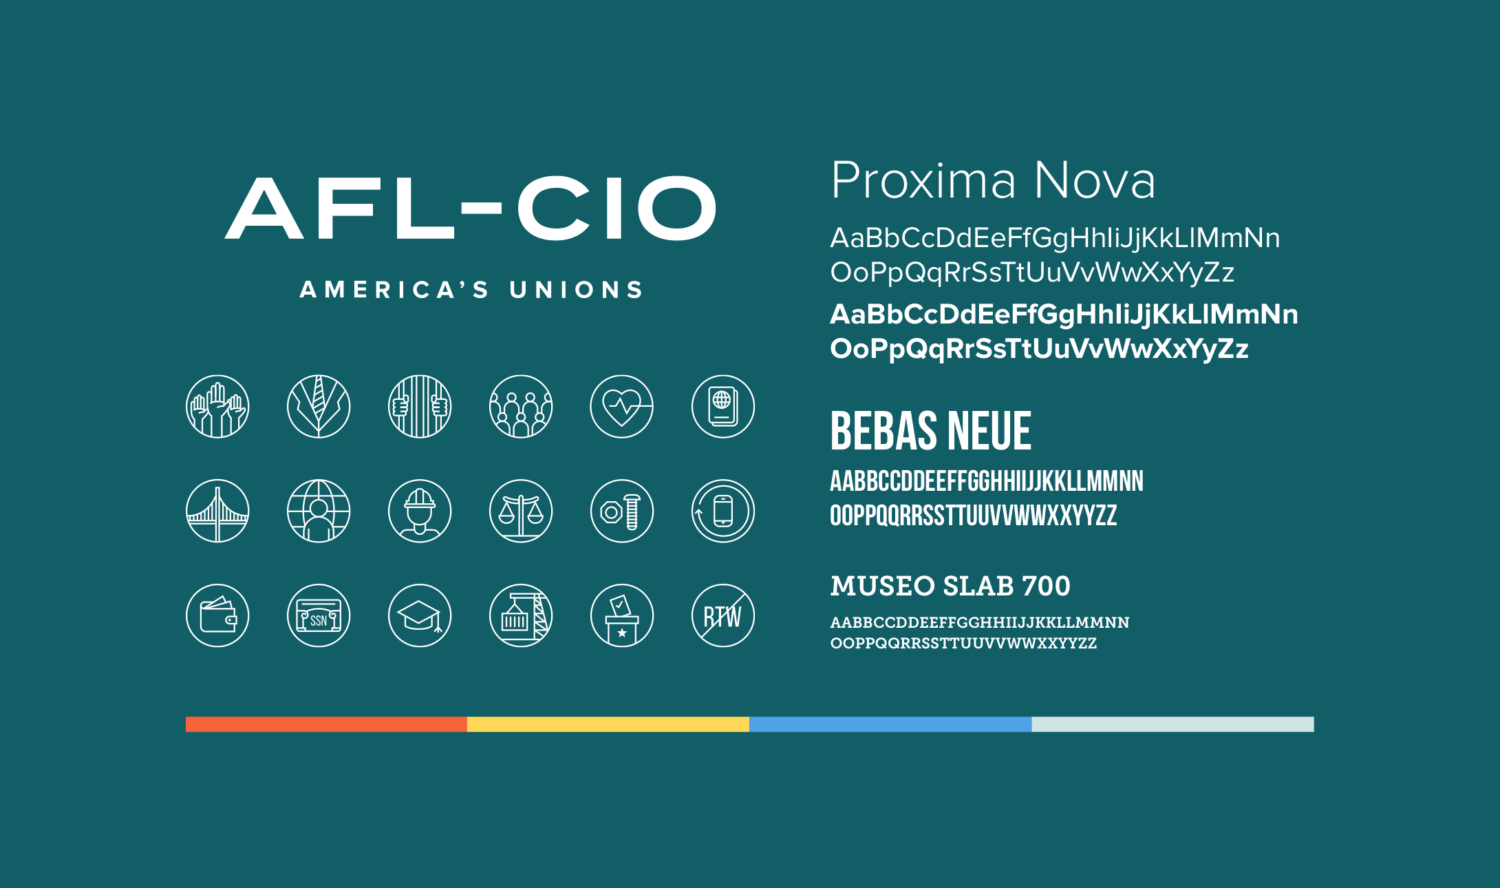 Image of the updated typography, color palette, and iconography for AFL-CIO created by Teal Media